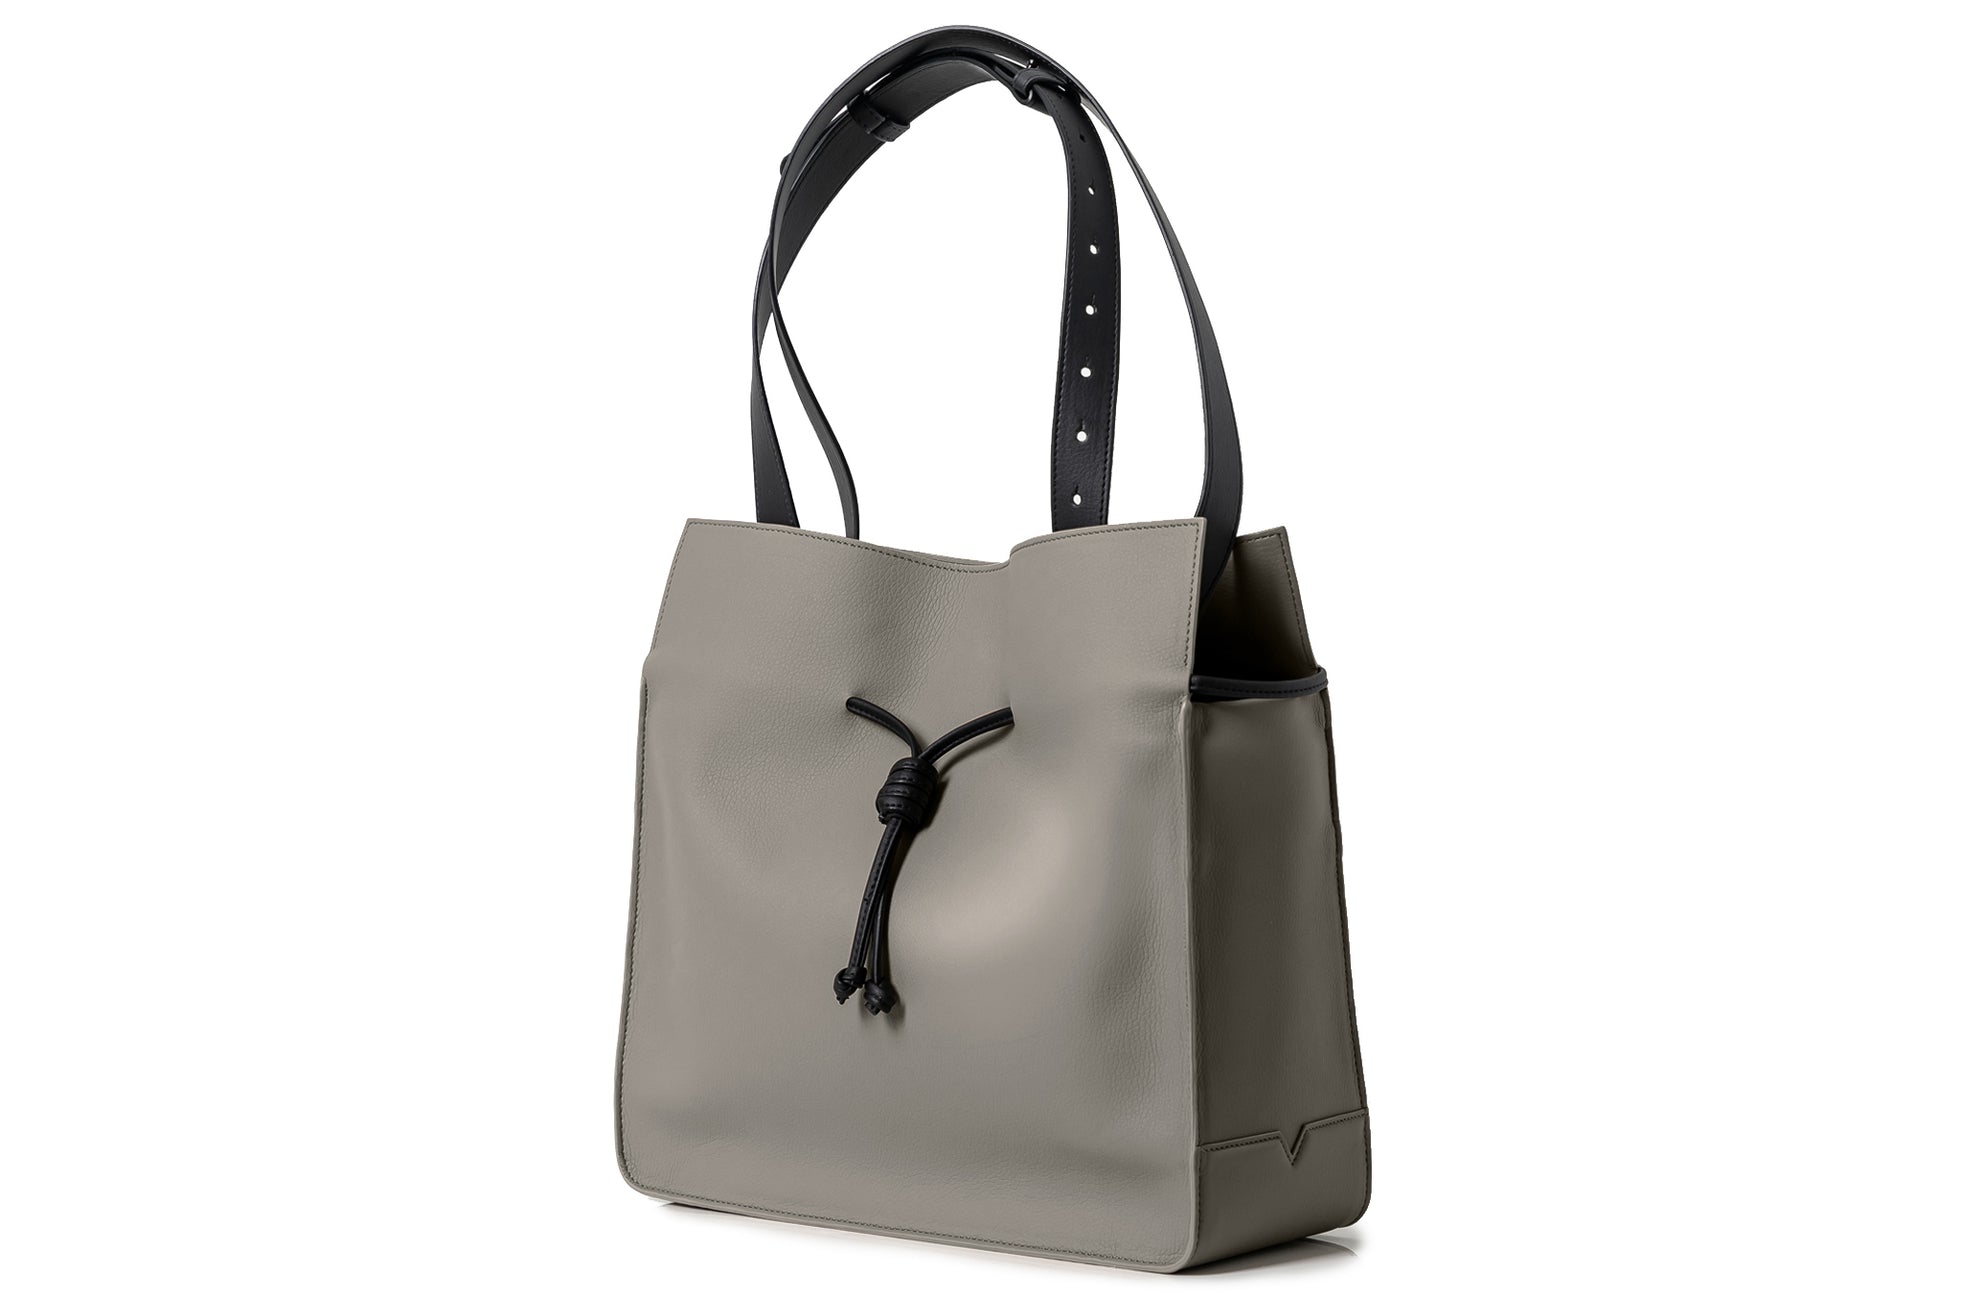 The Medium Shopper in Technik-Leather in Stone and Black image 3